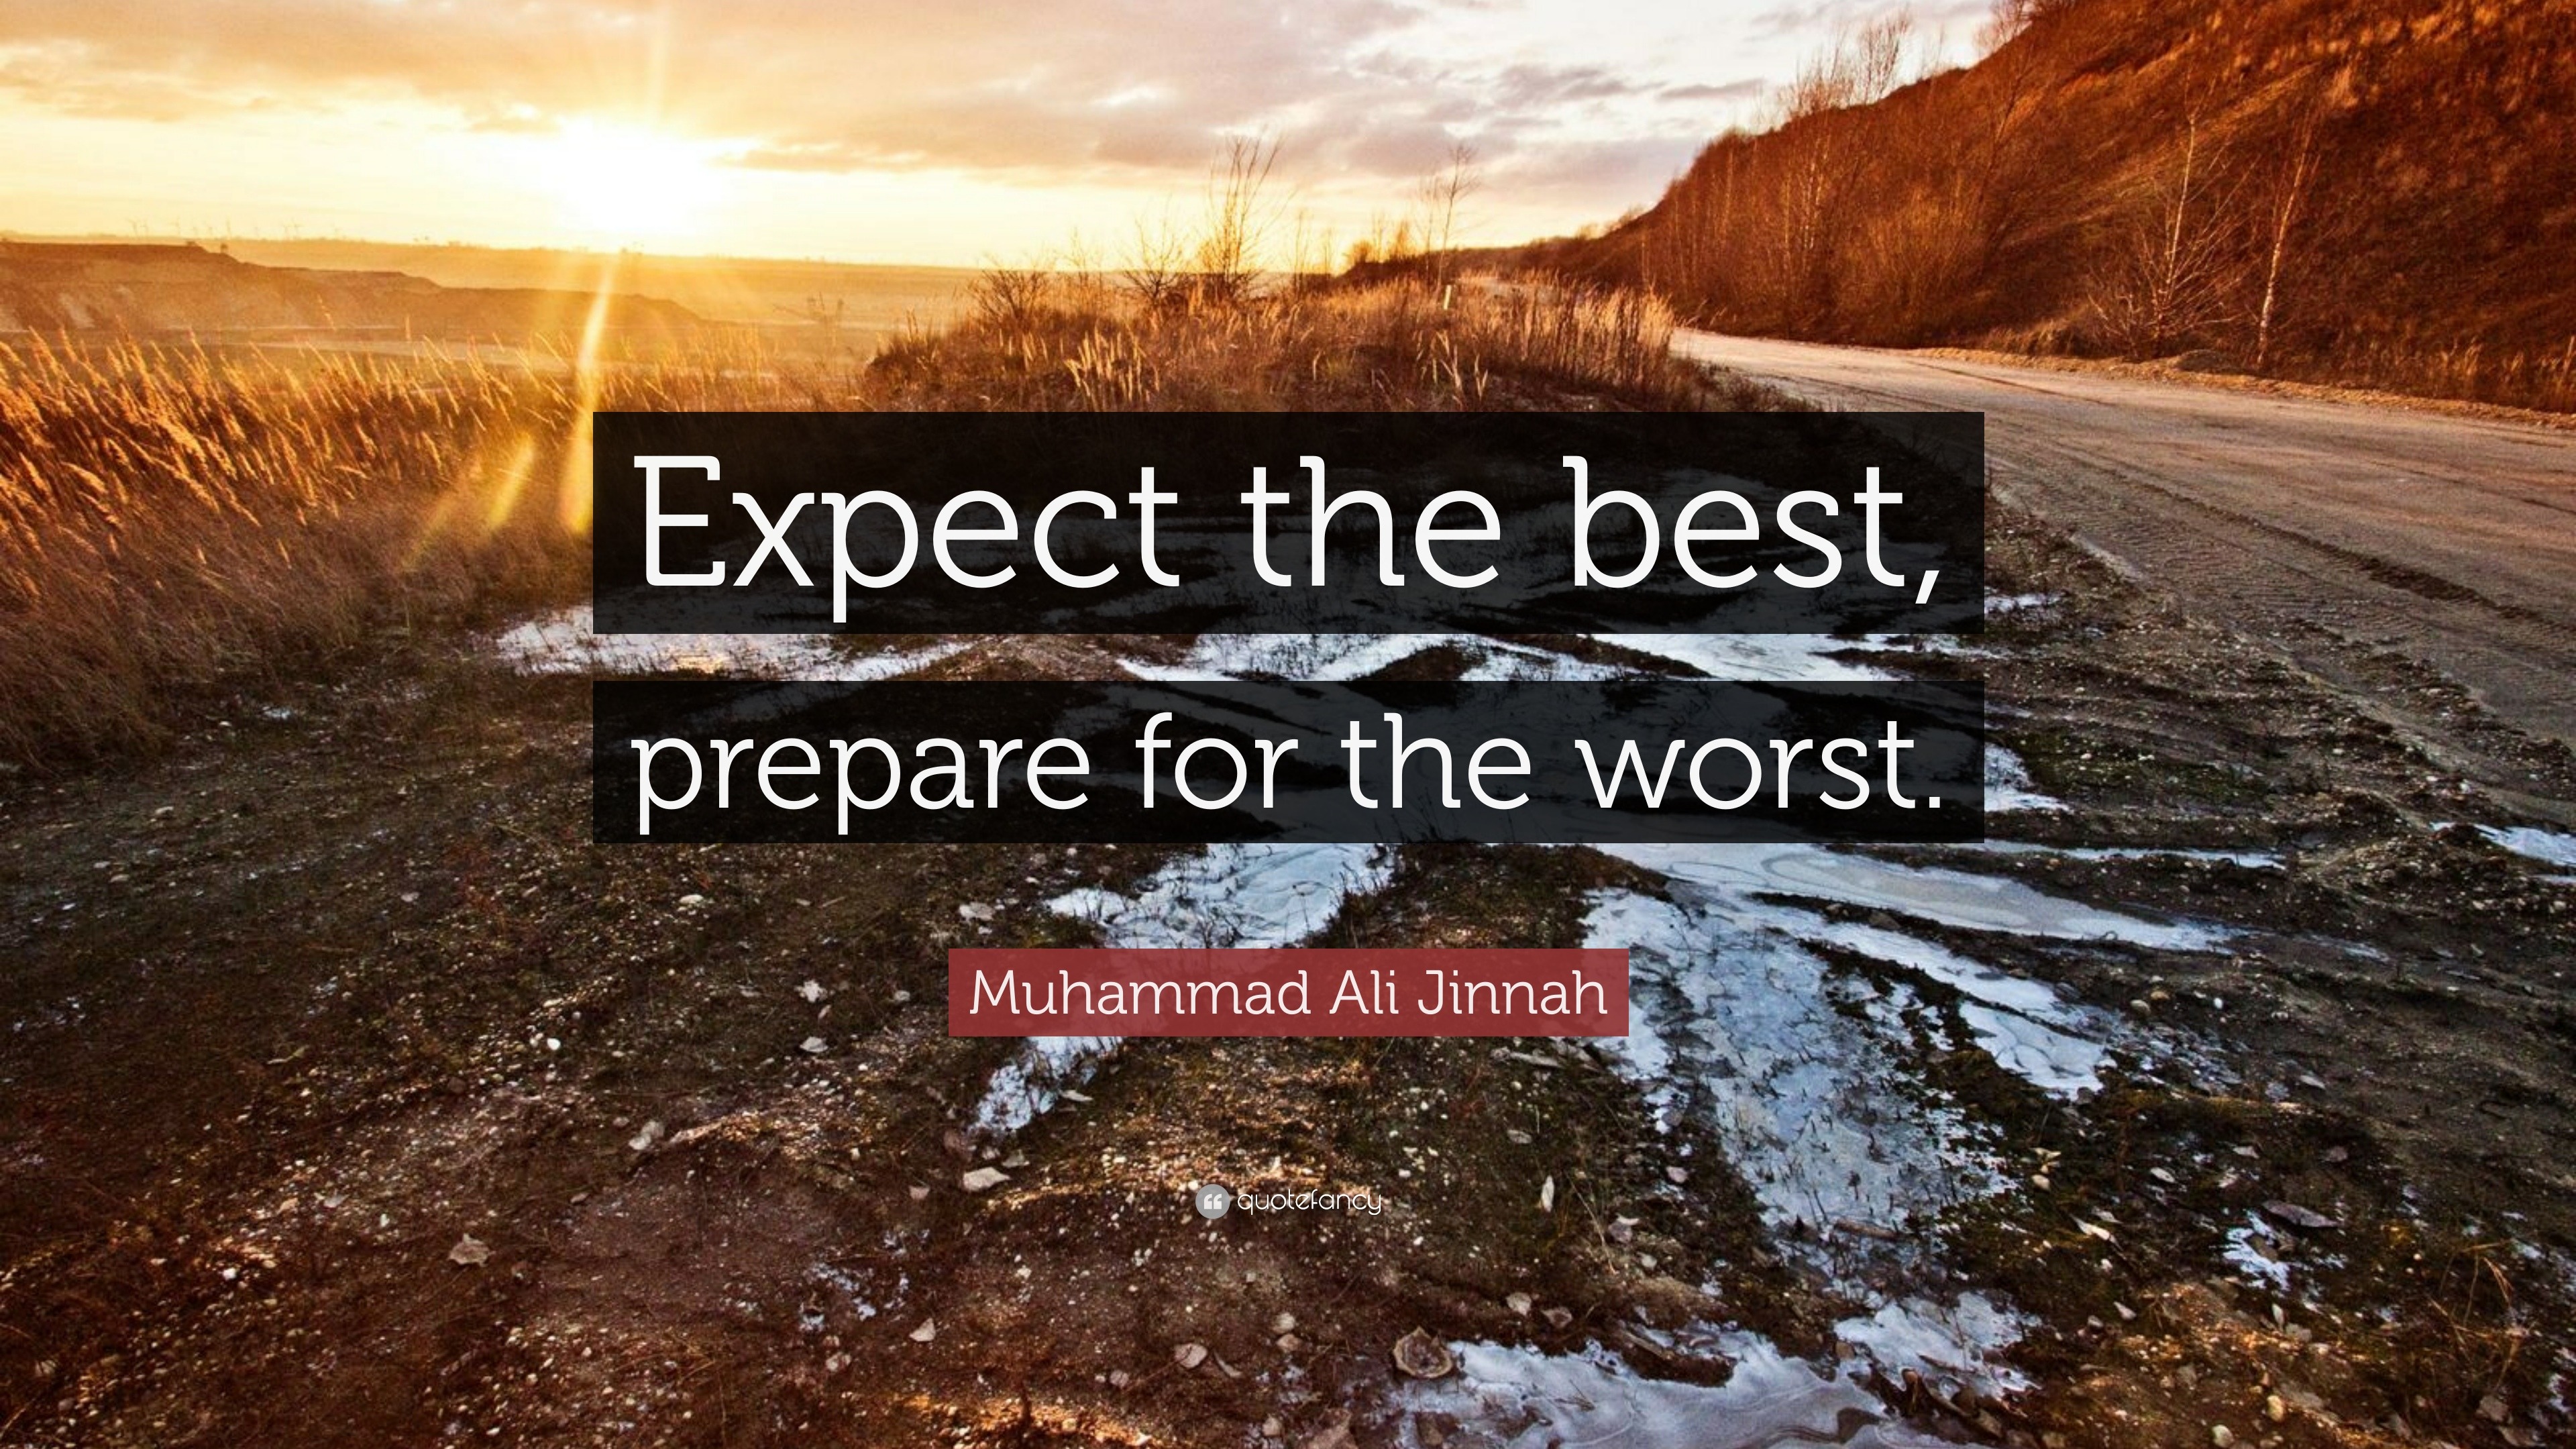 Muhammad Ali Jinnah Quote: "Expect the best, prepare for ...